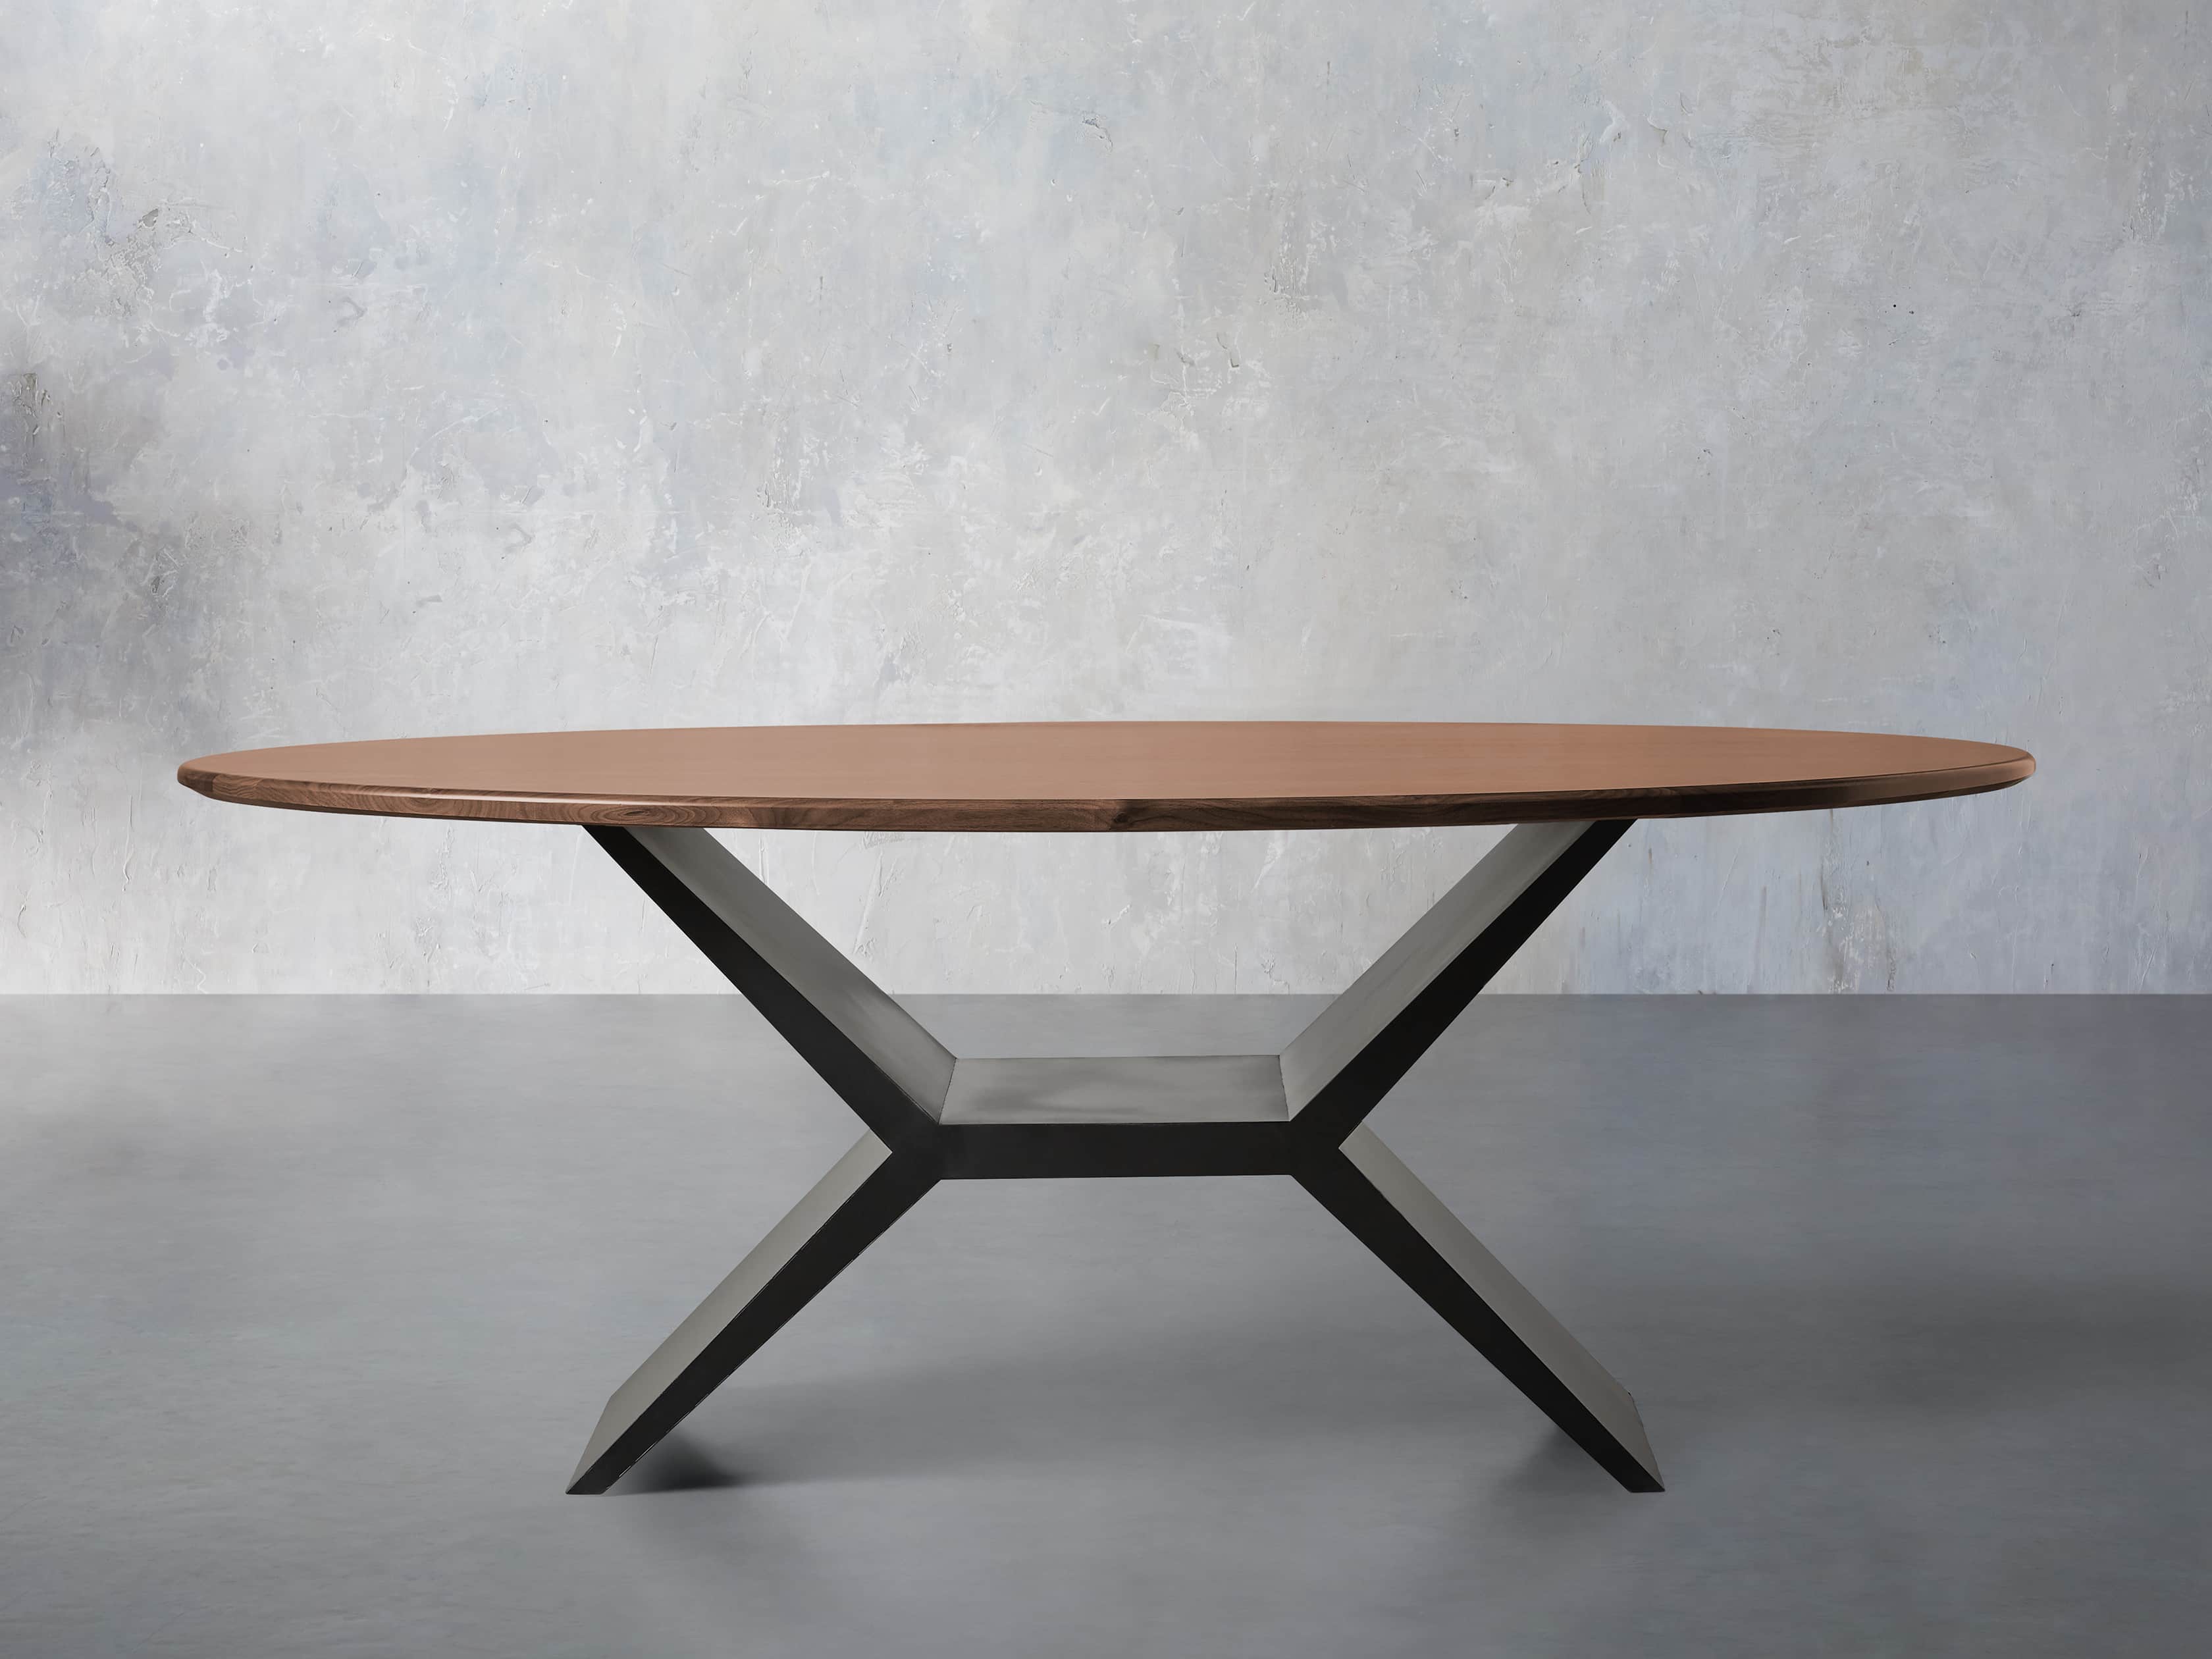 View the Jacob Oval Dining Table with Vertex Base | Variant: BROWN WALNUT